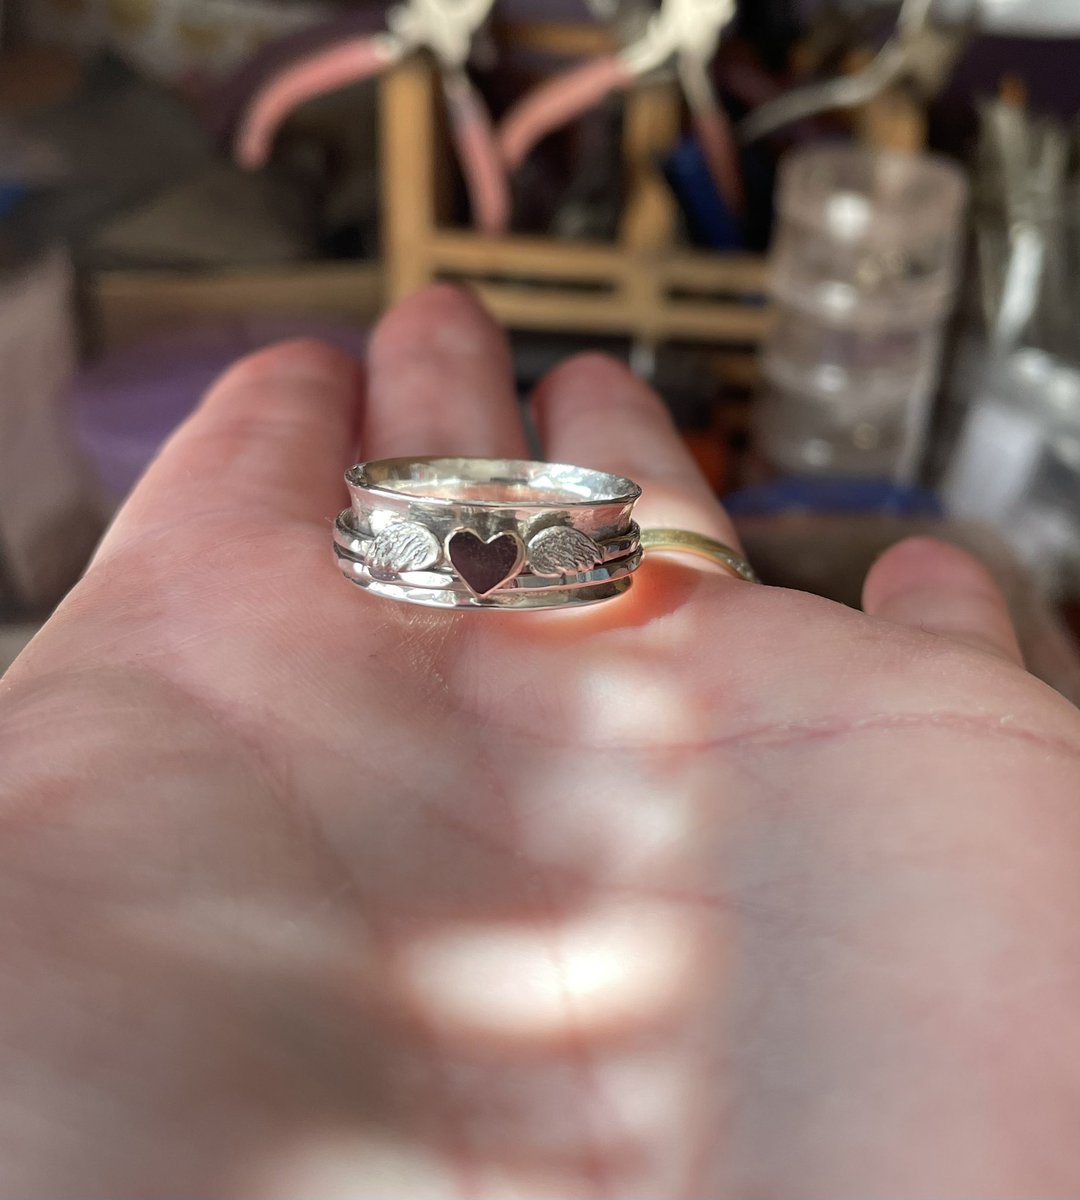 Finished this beautiful spinner ring today 🥰 #TheCraftersUk #bizbubble #UKMakers #Shophandmade #htlmp #SBSwinner #SmallBusiness #SBSnetwork #CraftBizParty #MHHSBD #SmartSocial #womeninbusiness